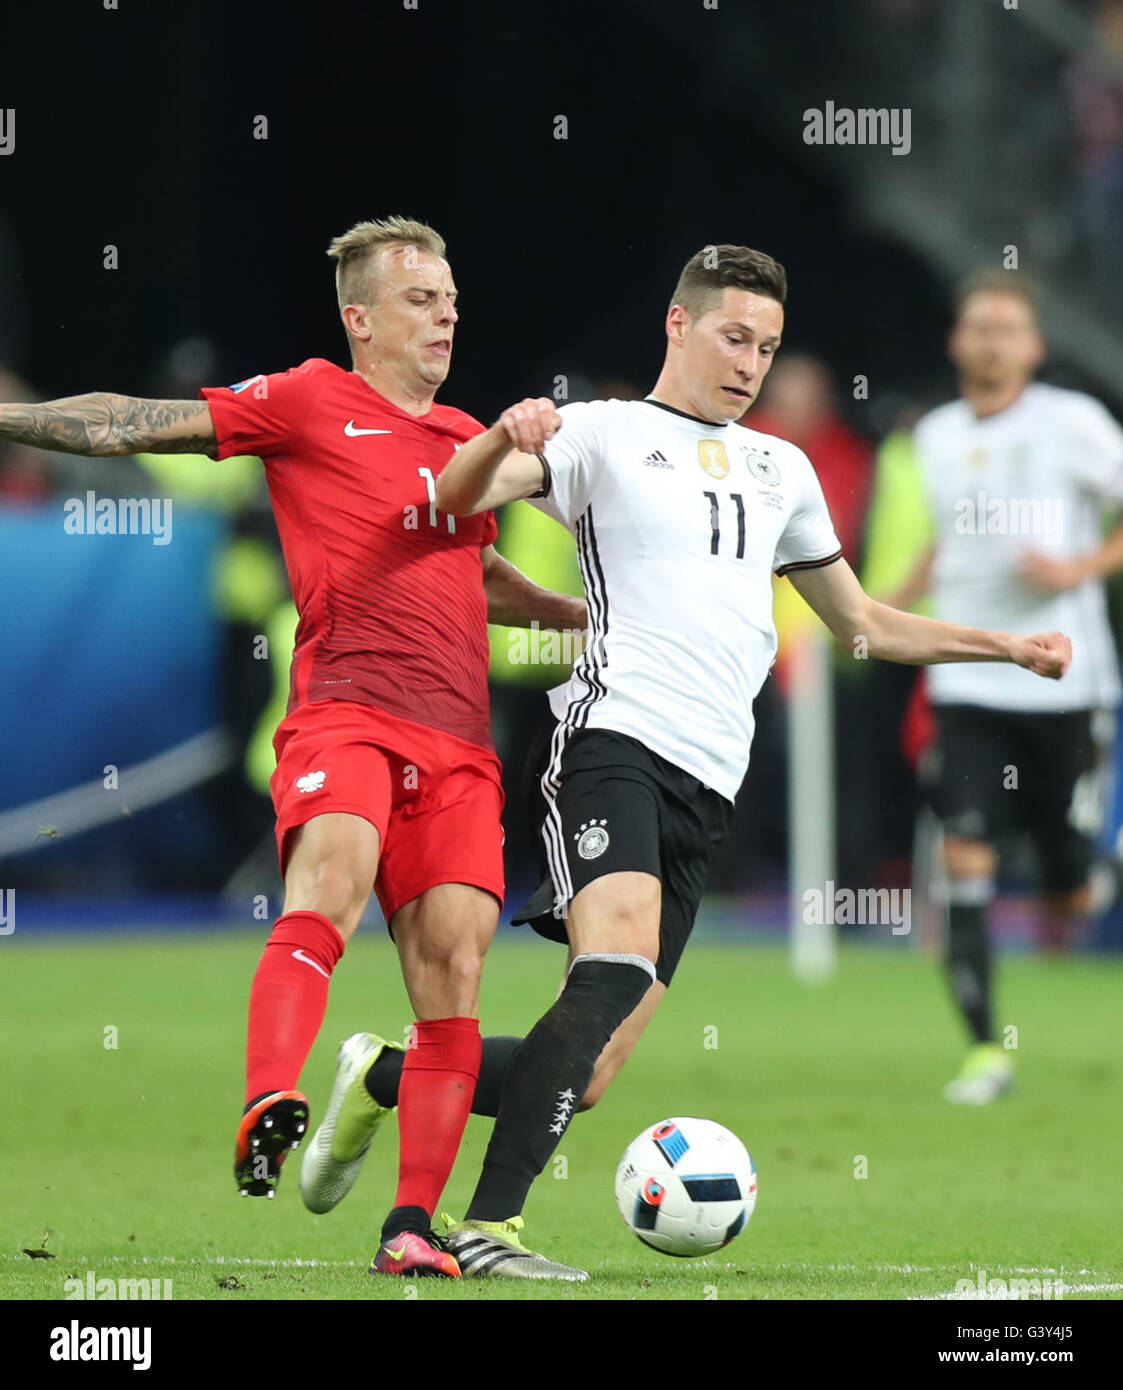 Paris, France. 16th June, 2016. Julian Draxler(R) of Germany competes during the Euro 2016 Group C soccer match between Germany and Poland in Paris, France, June 16, 2016. Credit:  Bai Xuefei/Xinhua/Alamy Live News Stock Photo